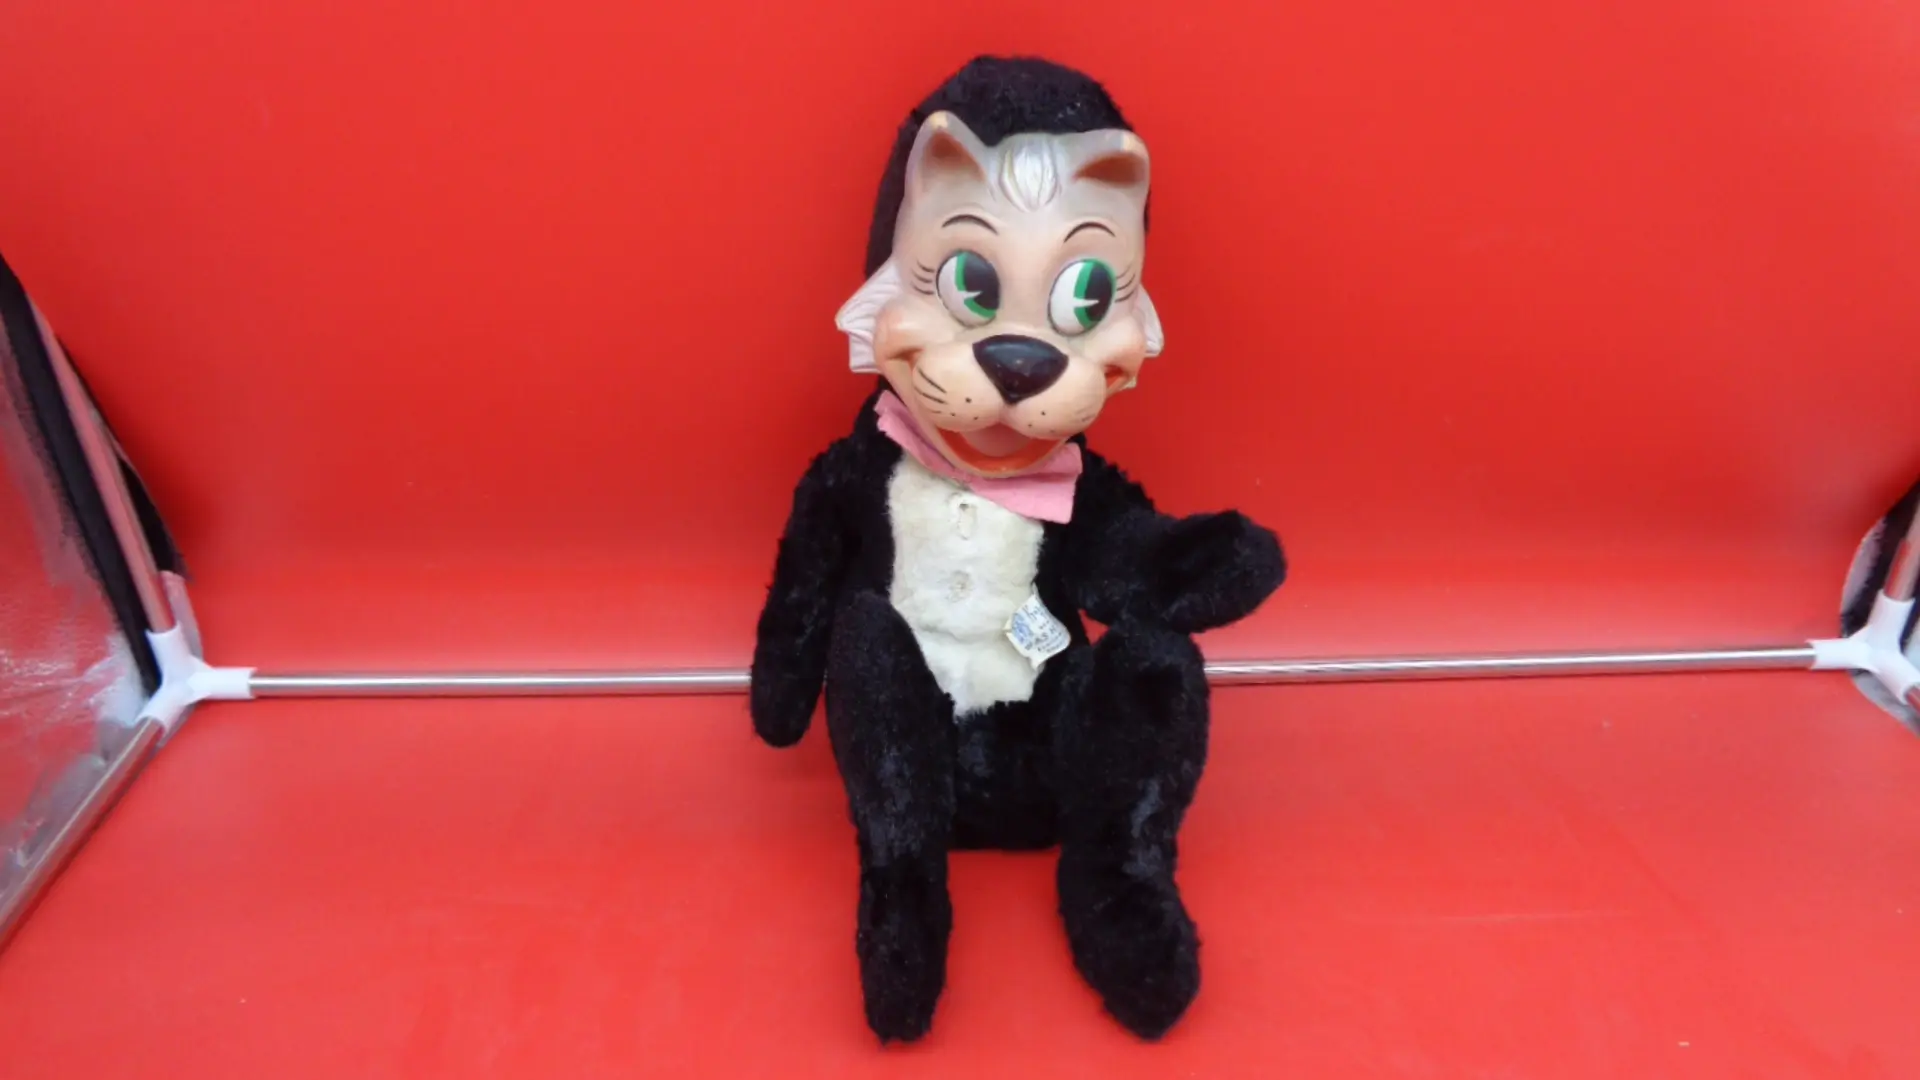 Display of front view of Vintage Plush Mr. Jink Cat